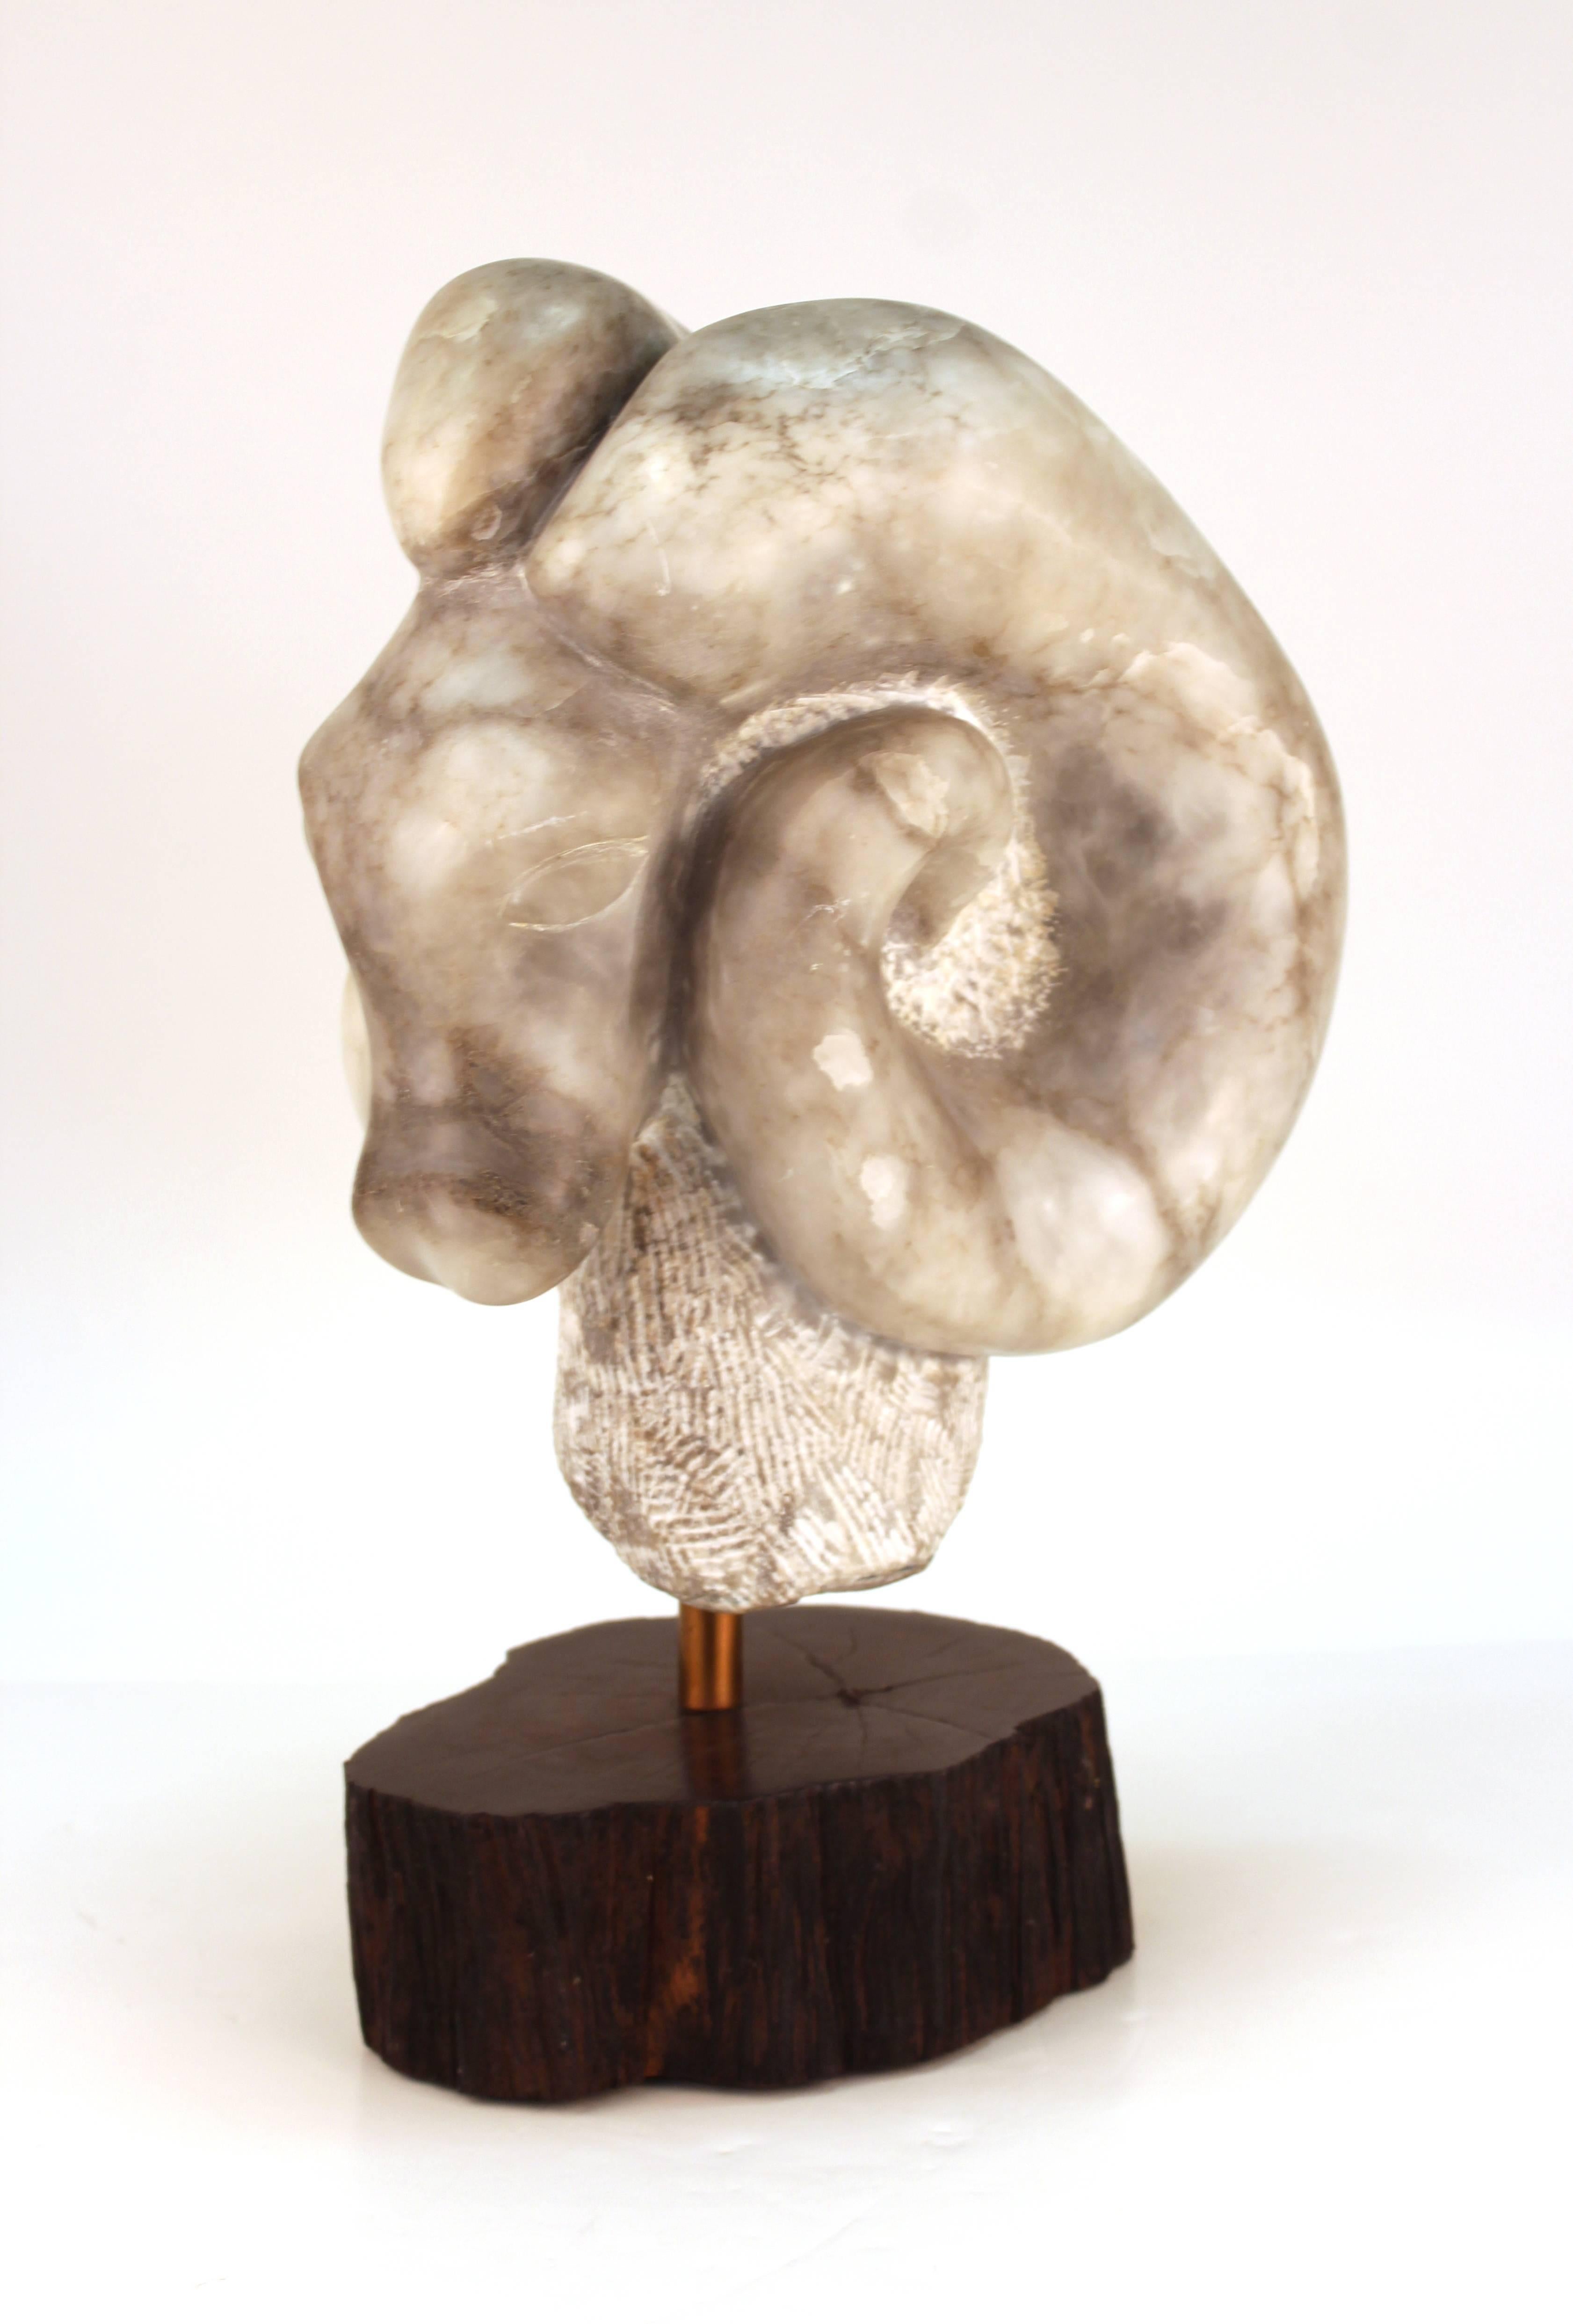 A Mid-Century Modern sculpted marble statue depicting a ram's head. The piece is mounted on a wooden rotating base. The piece is in remarkable vintage condition appropriate with age and use.